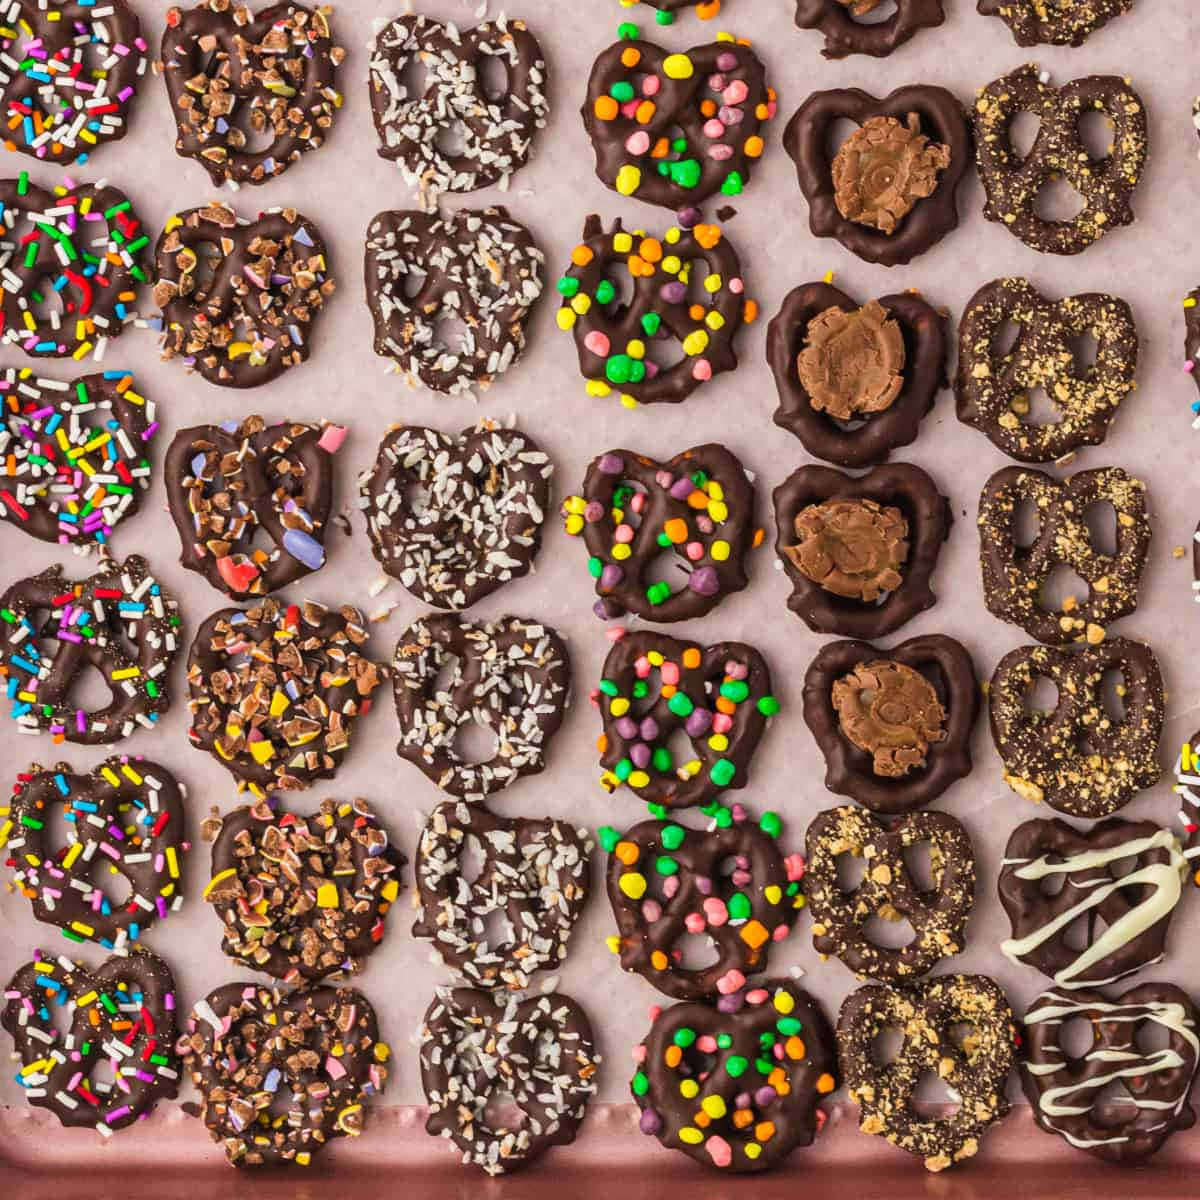 A Tray Of Chocolate Pretzels